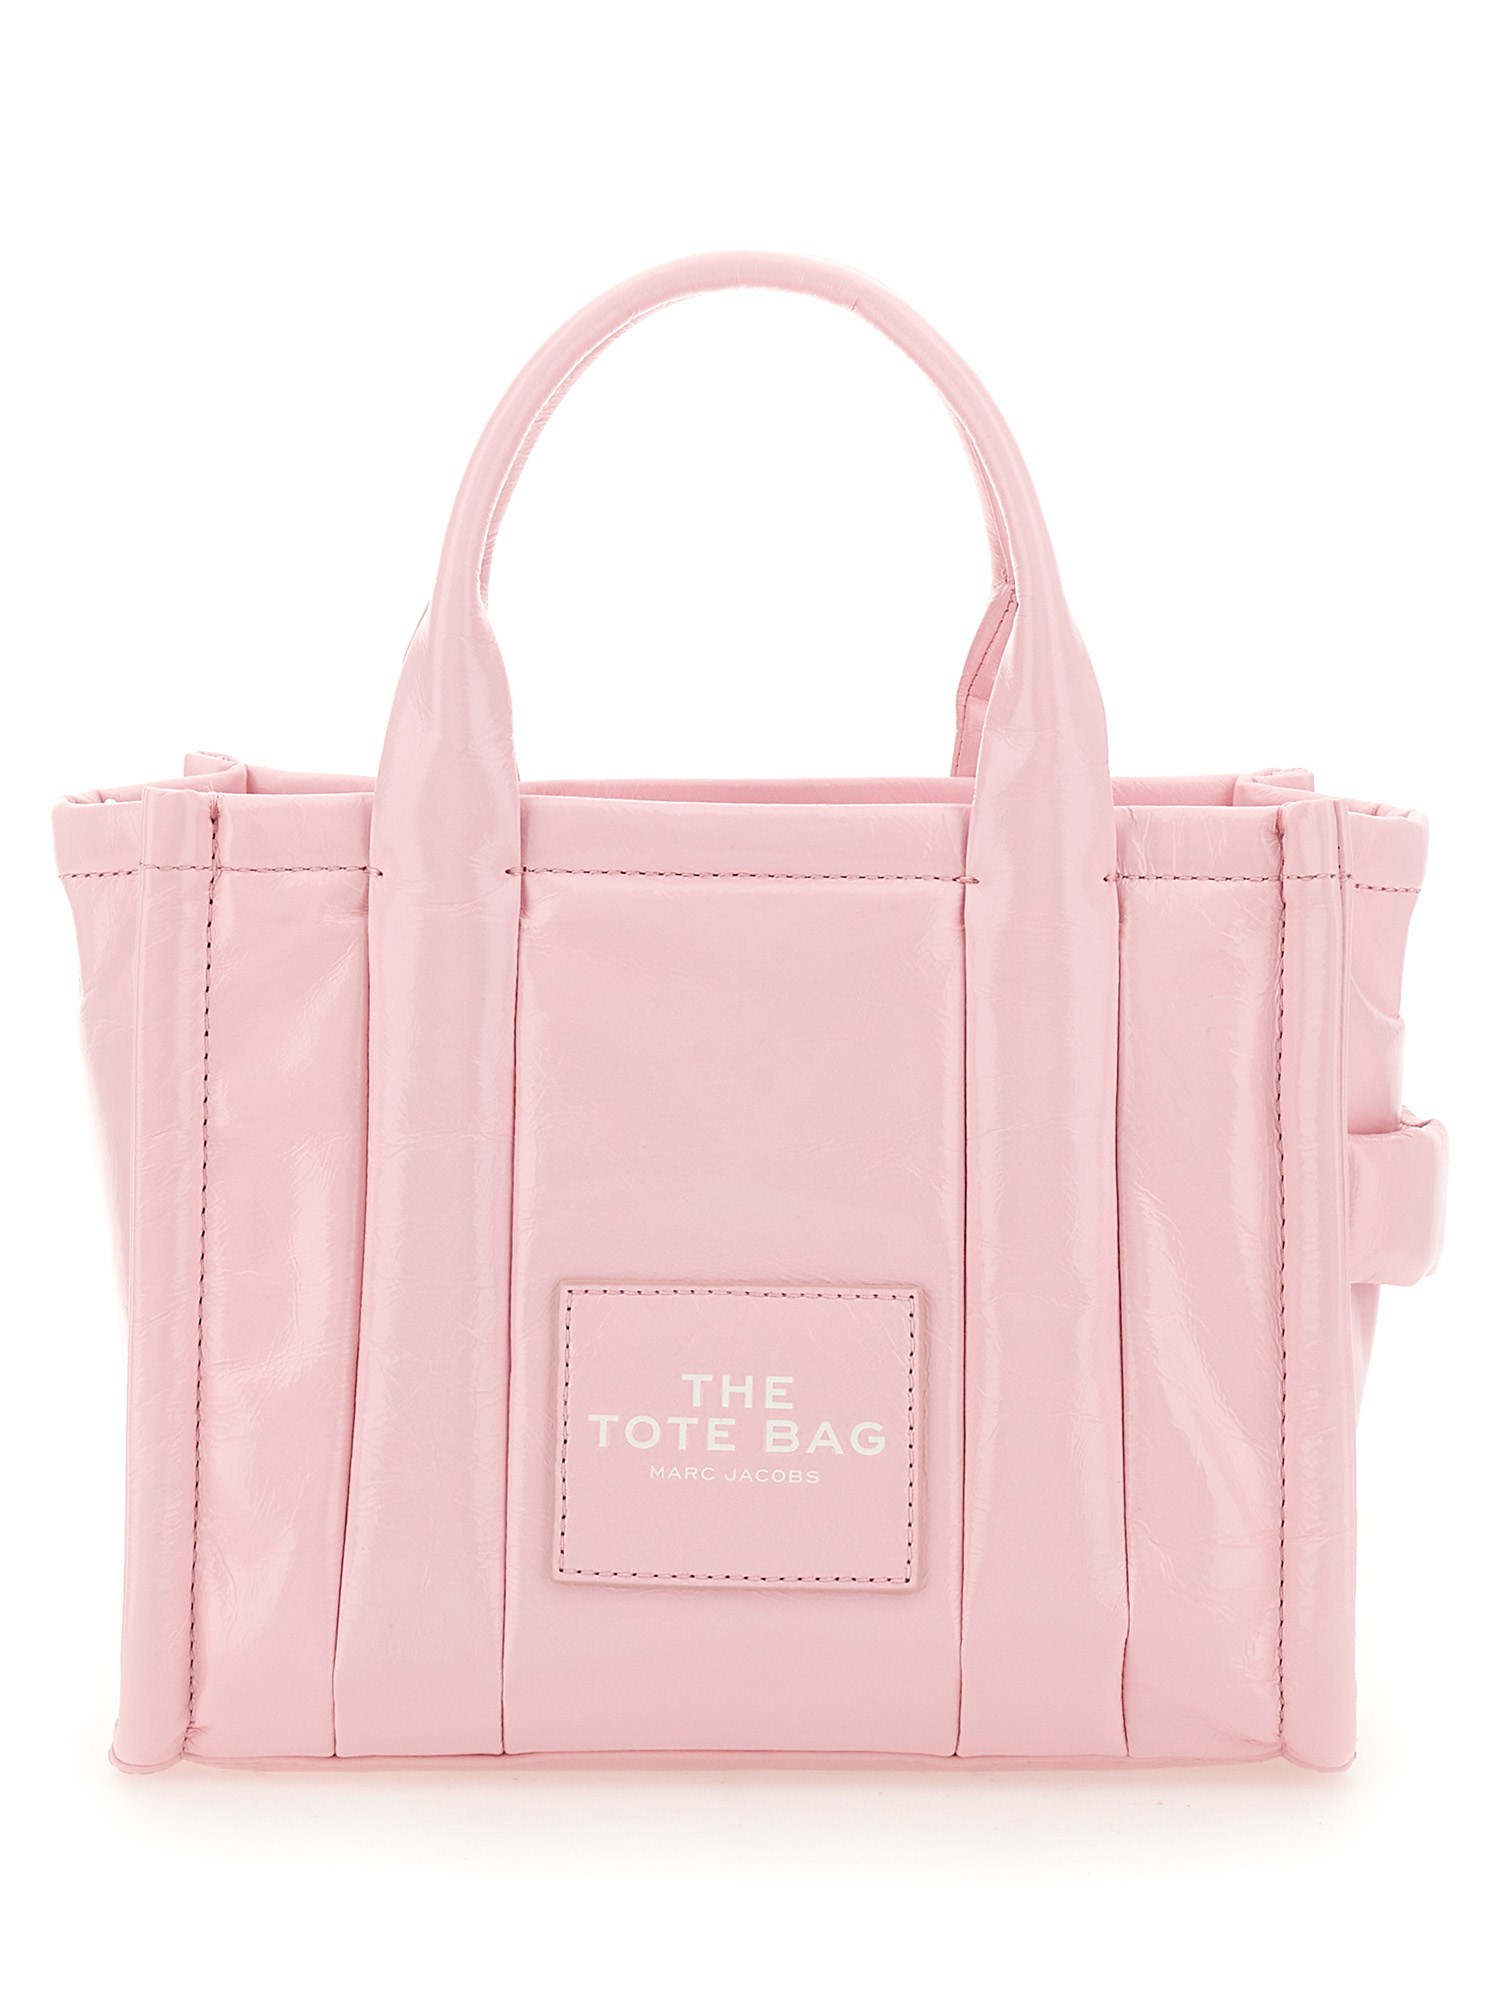 Marc Jacobs Bright Pink Leather The Small Traveler Tote Bag